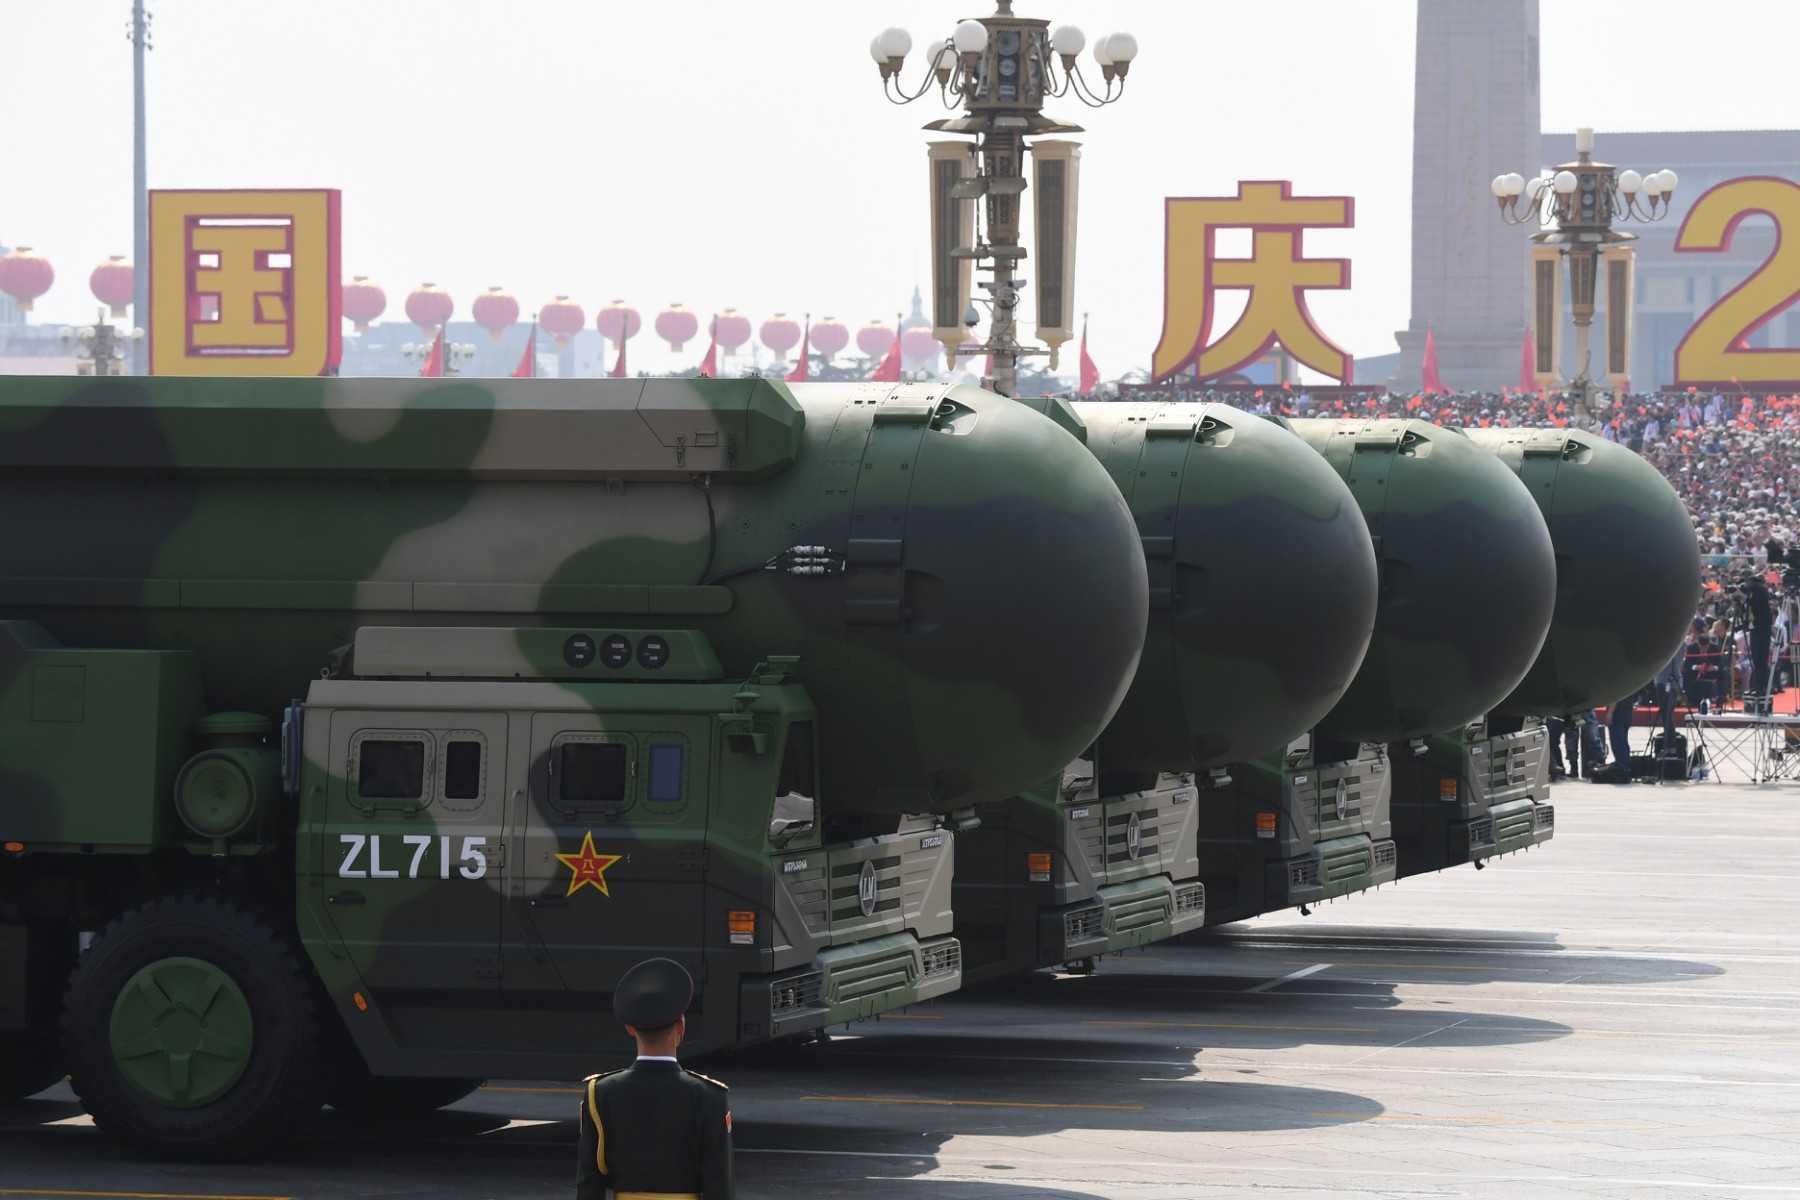 China's DF-41 nuclear-capable intercontinental ballistic missiles are seen during a military parade at Tiananmen Square in Beijing on Oct 1, 2019. Photo: AFP